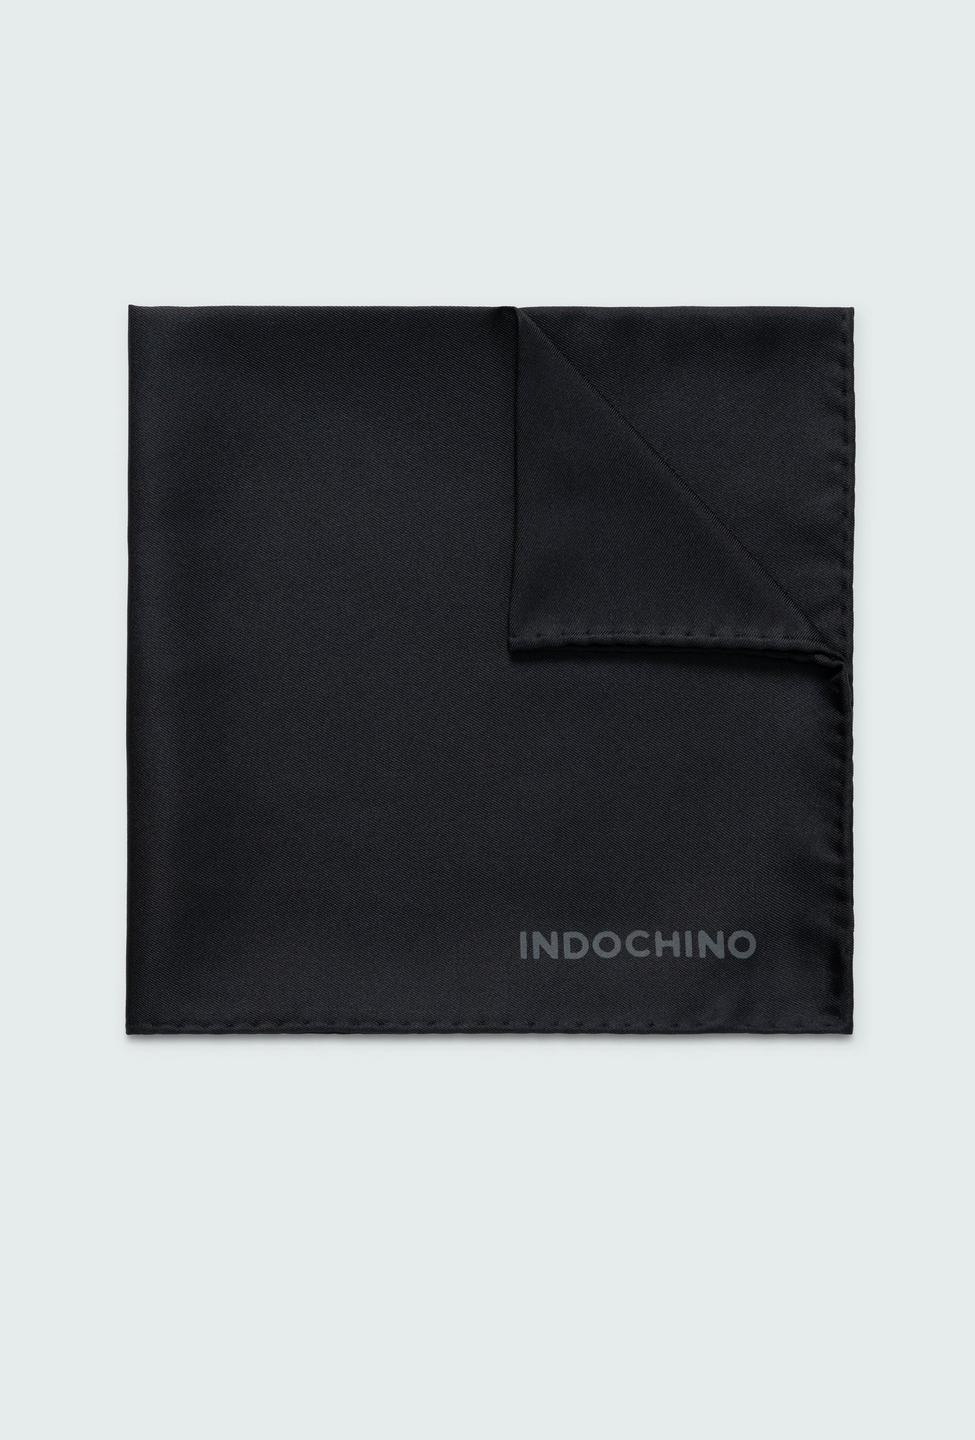 Black pocket square - Solid Design from Indochino Collection